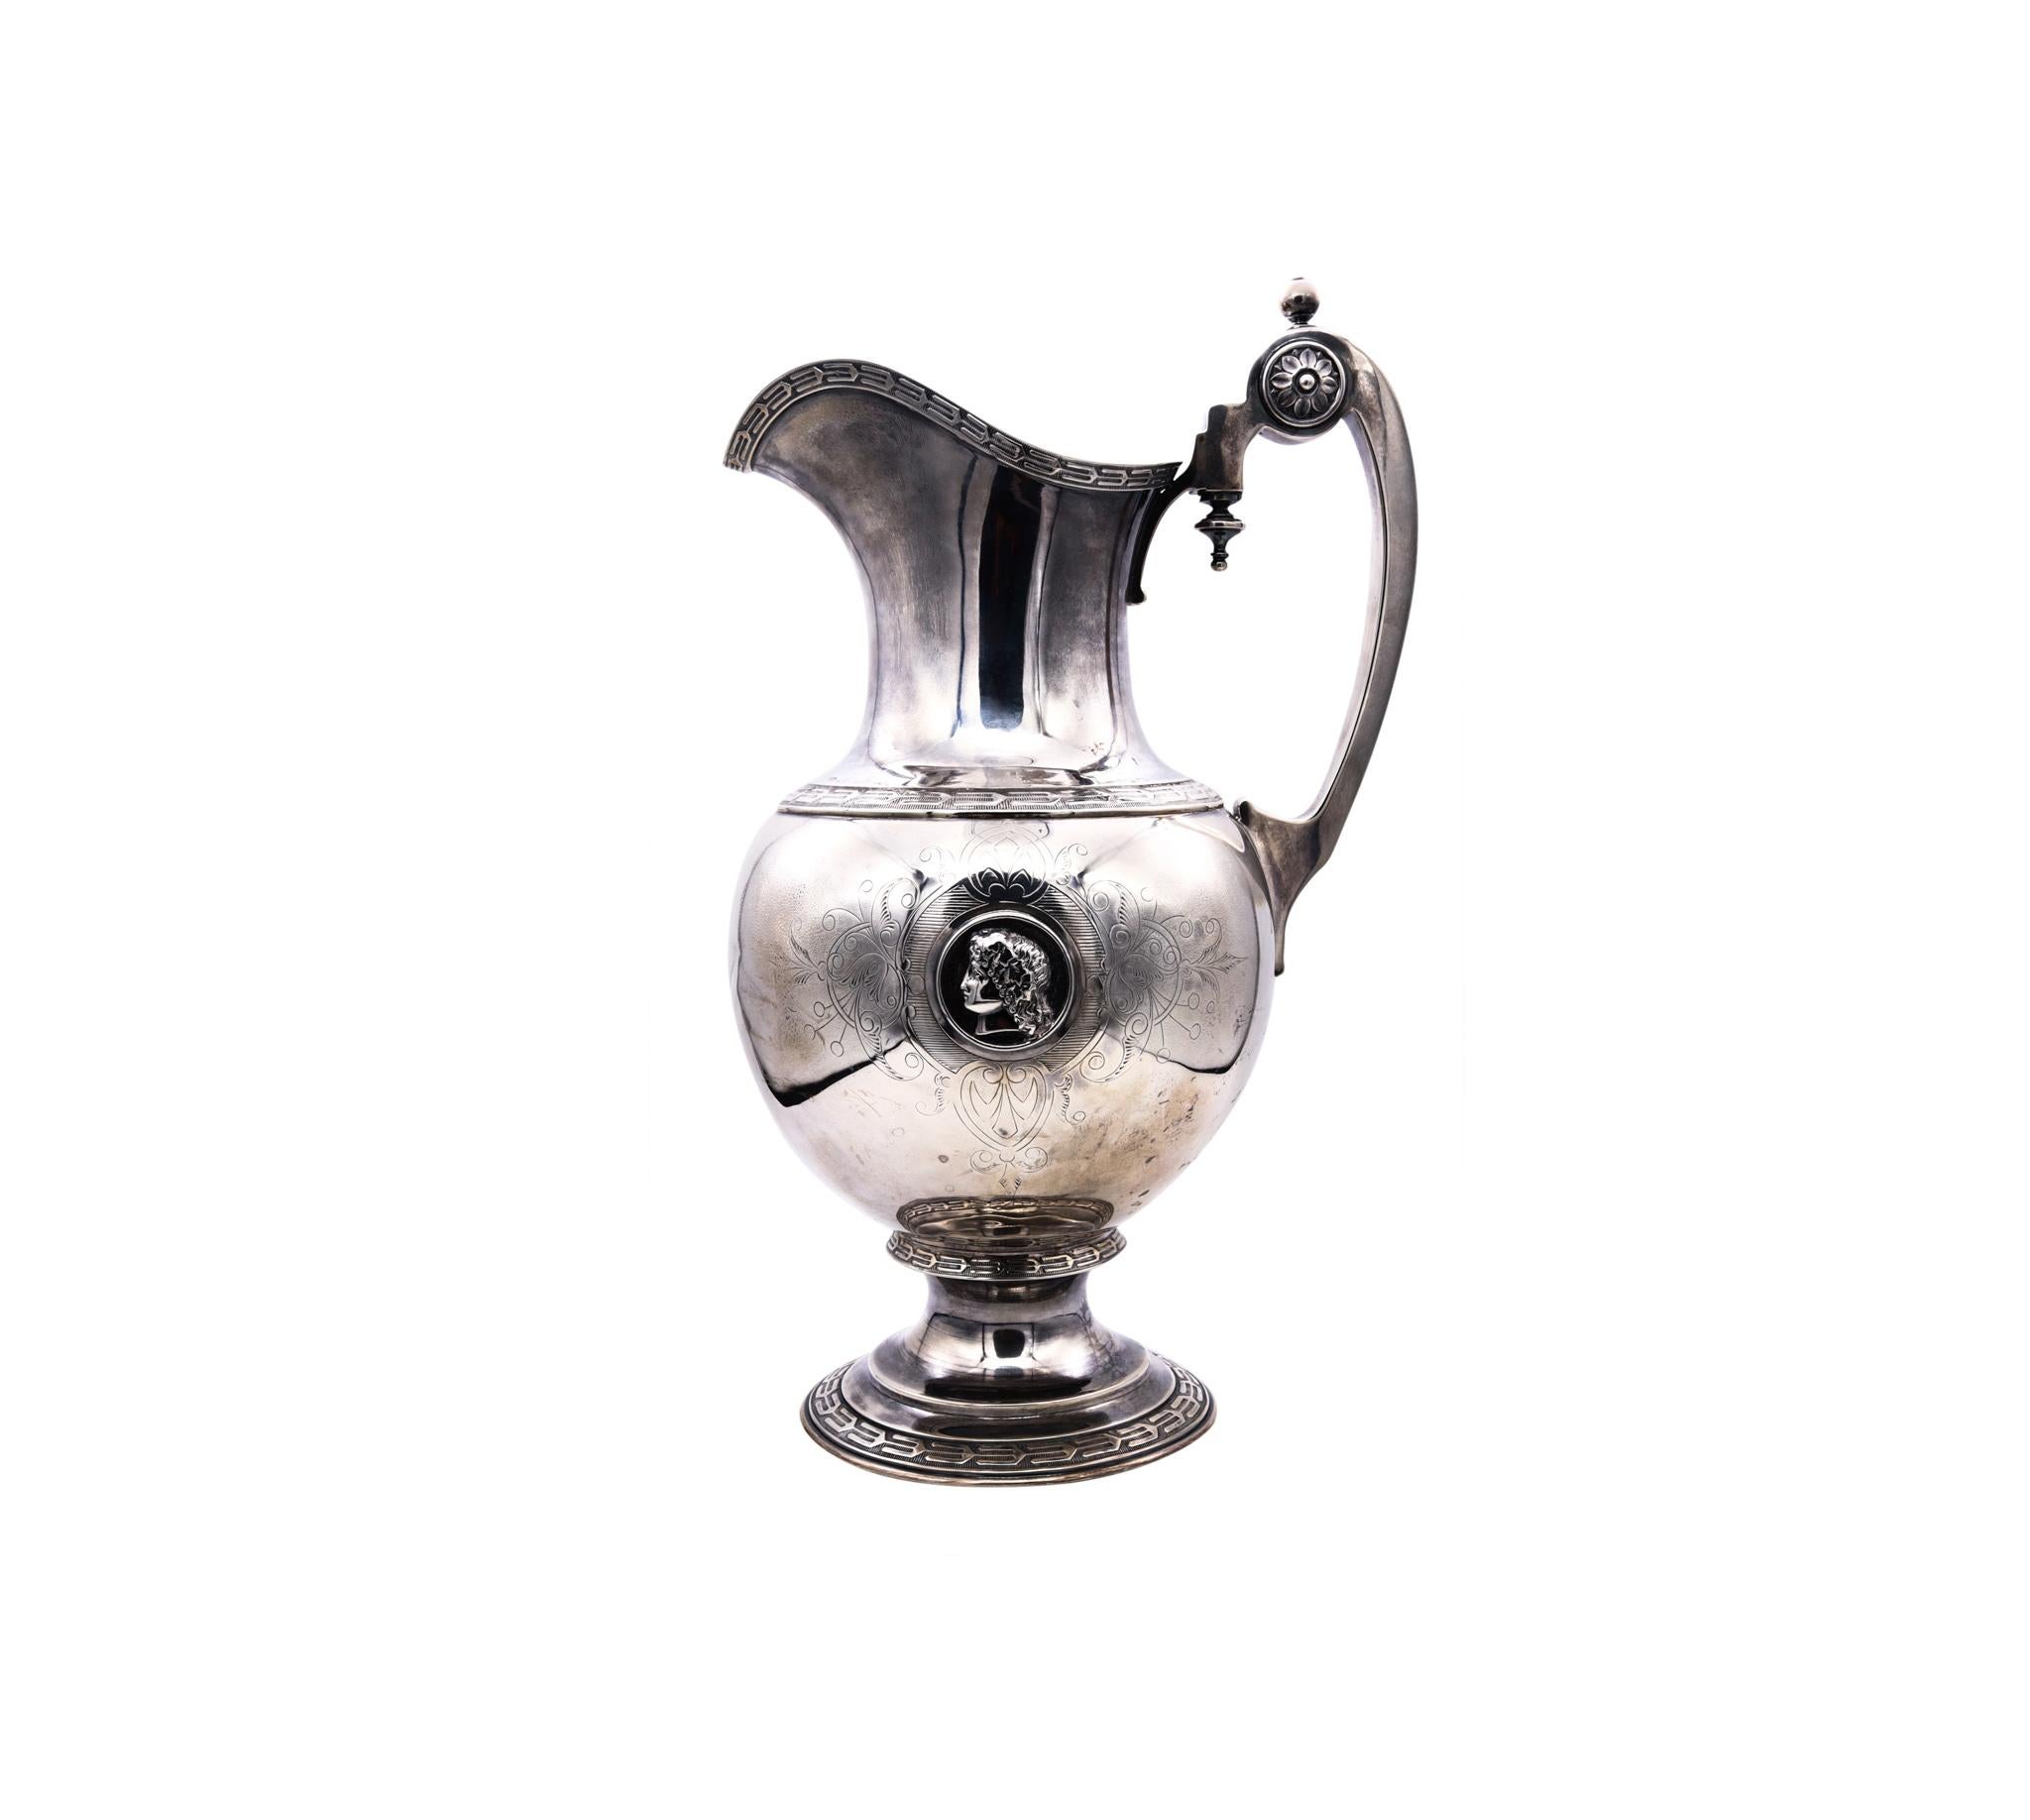 Medallion wine ewer designed by William Gale & Son.

Very rare and important piece of the American silversmith history. This fabulous wine ewer was made by the William Gale & Son Company, just five years before the American Civil War (1861-1865)